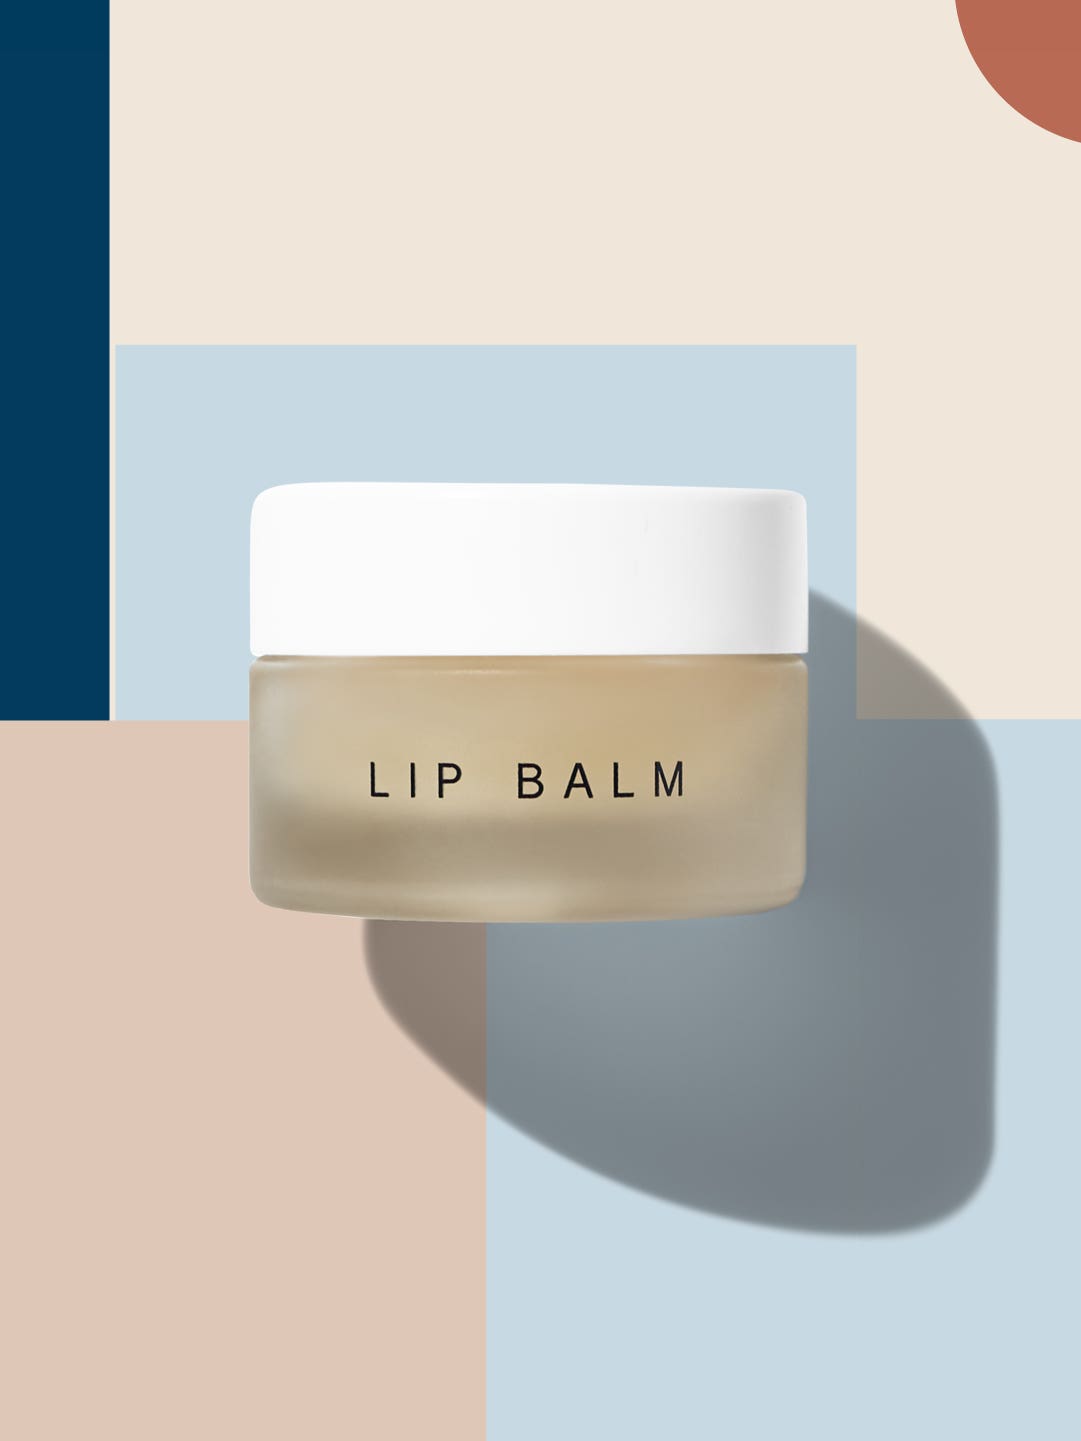 Four Years and 35 Samples Later… This Ultra-Hydrating Lip Balm Is Finally Available